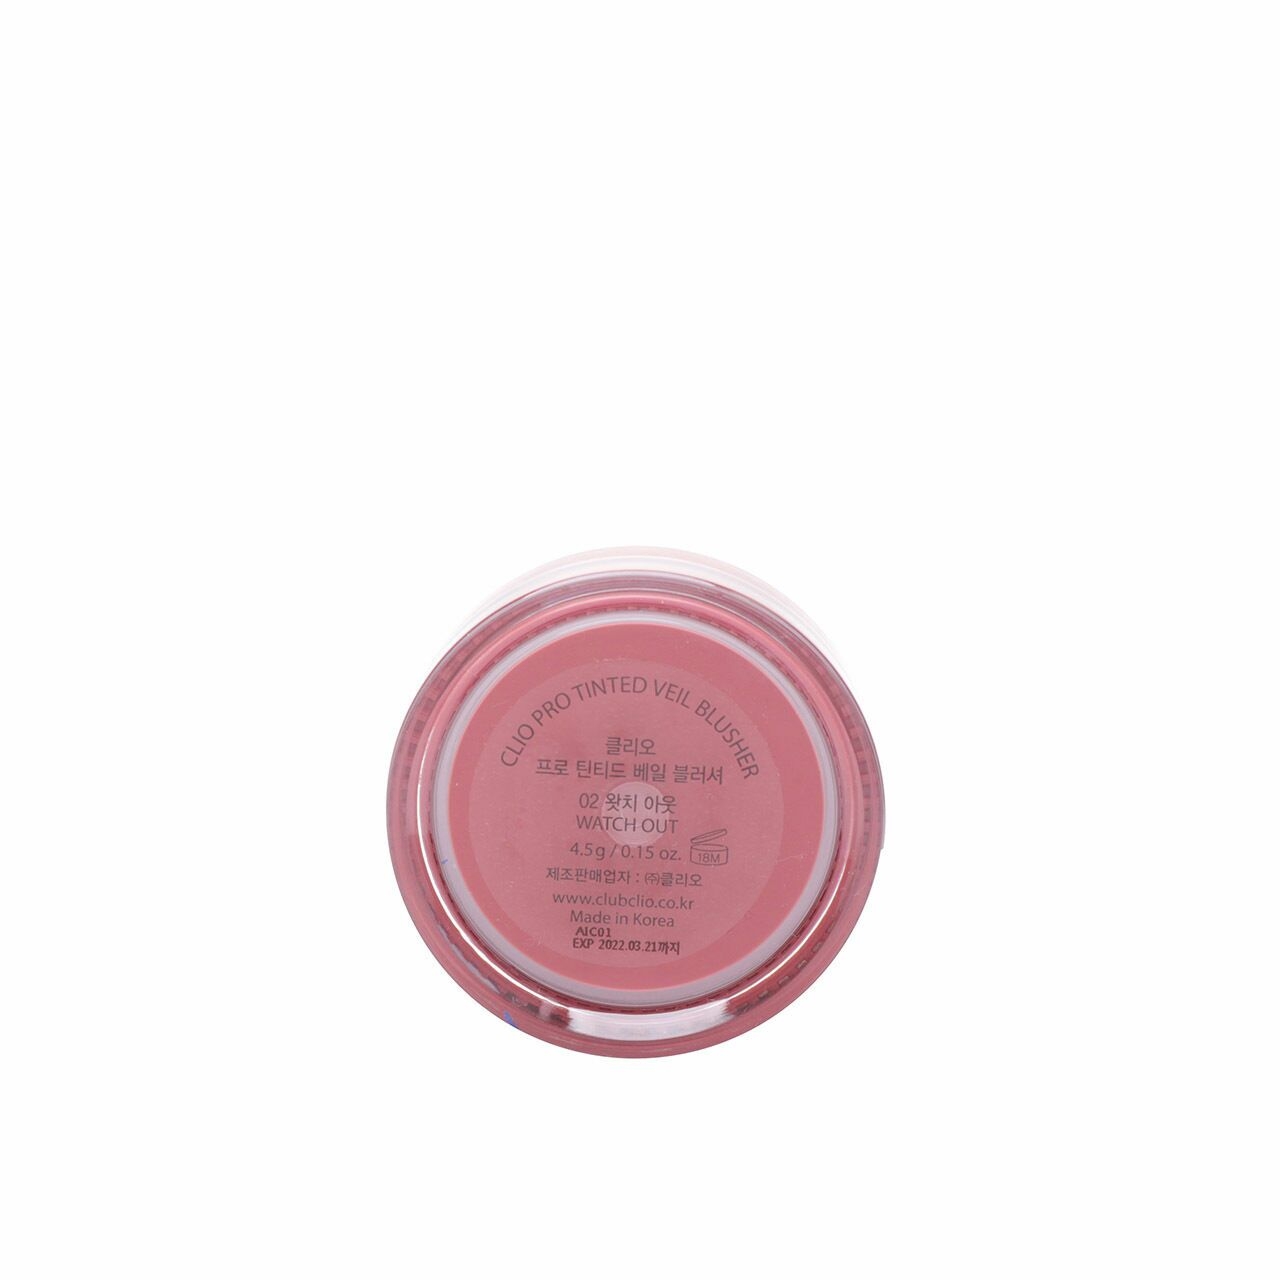 Clio Pro Tinted Veil Blusher 02 Watch Out Faces